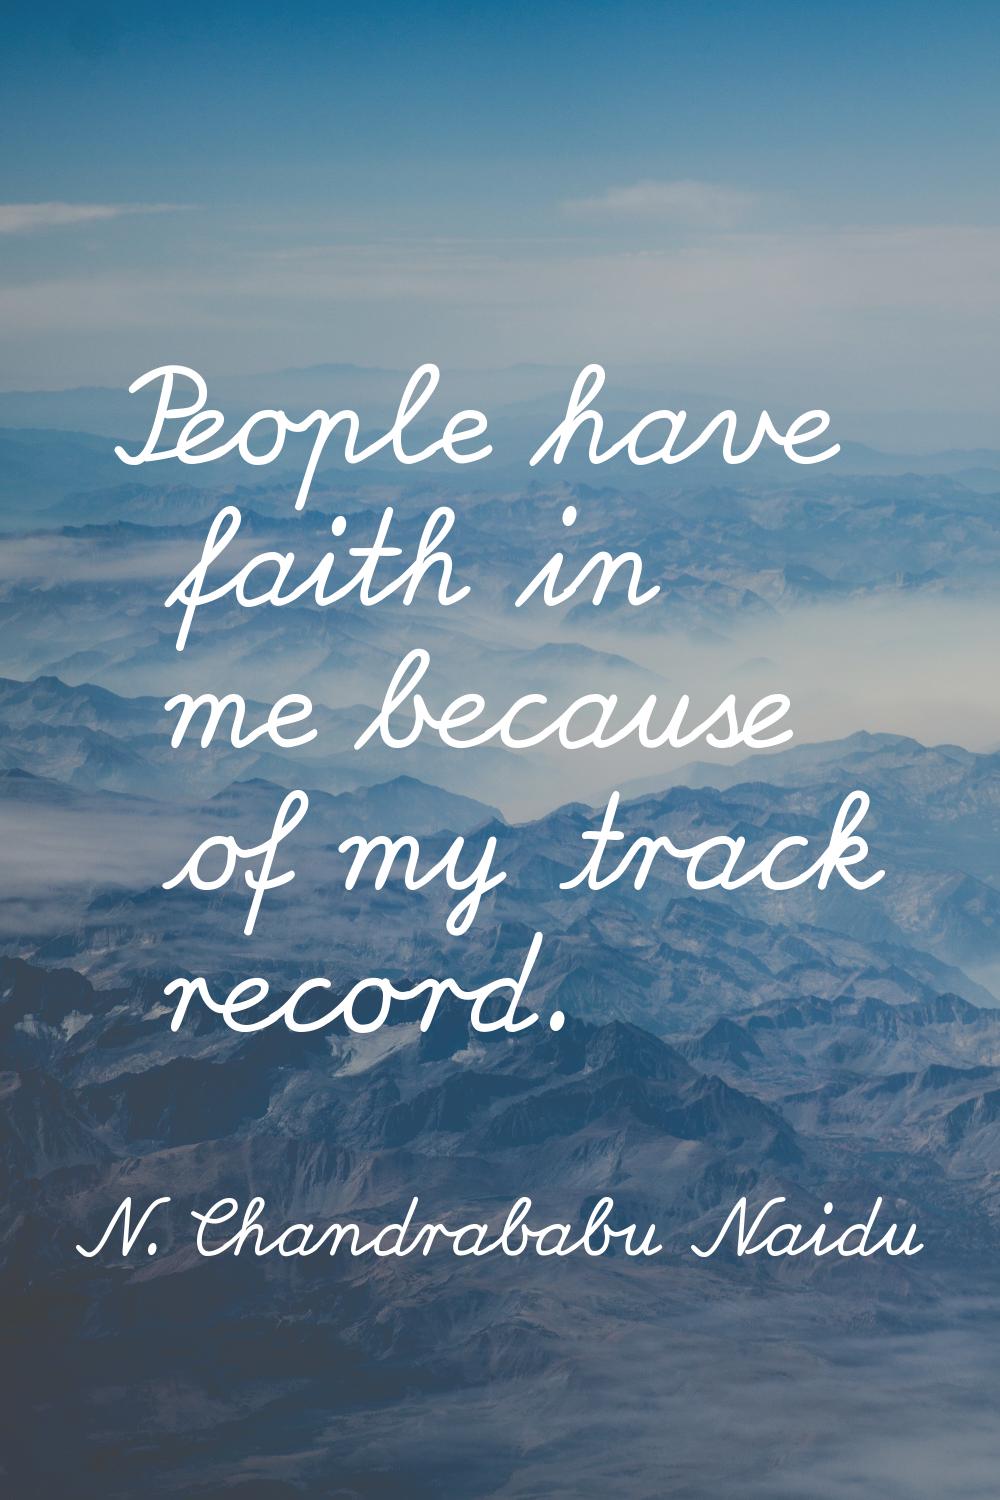 People have faith in me because of my track record.